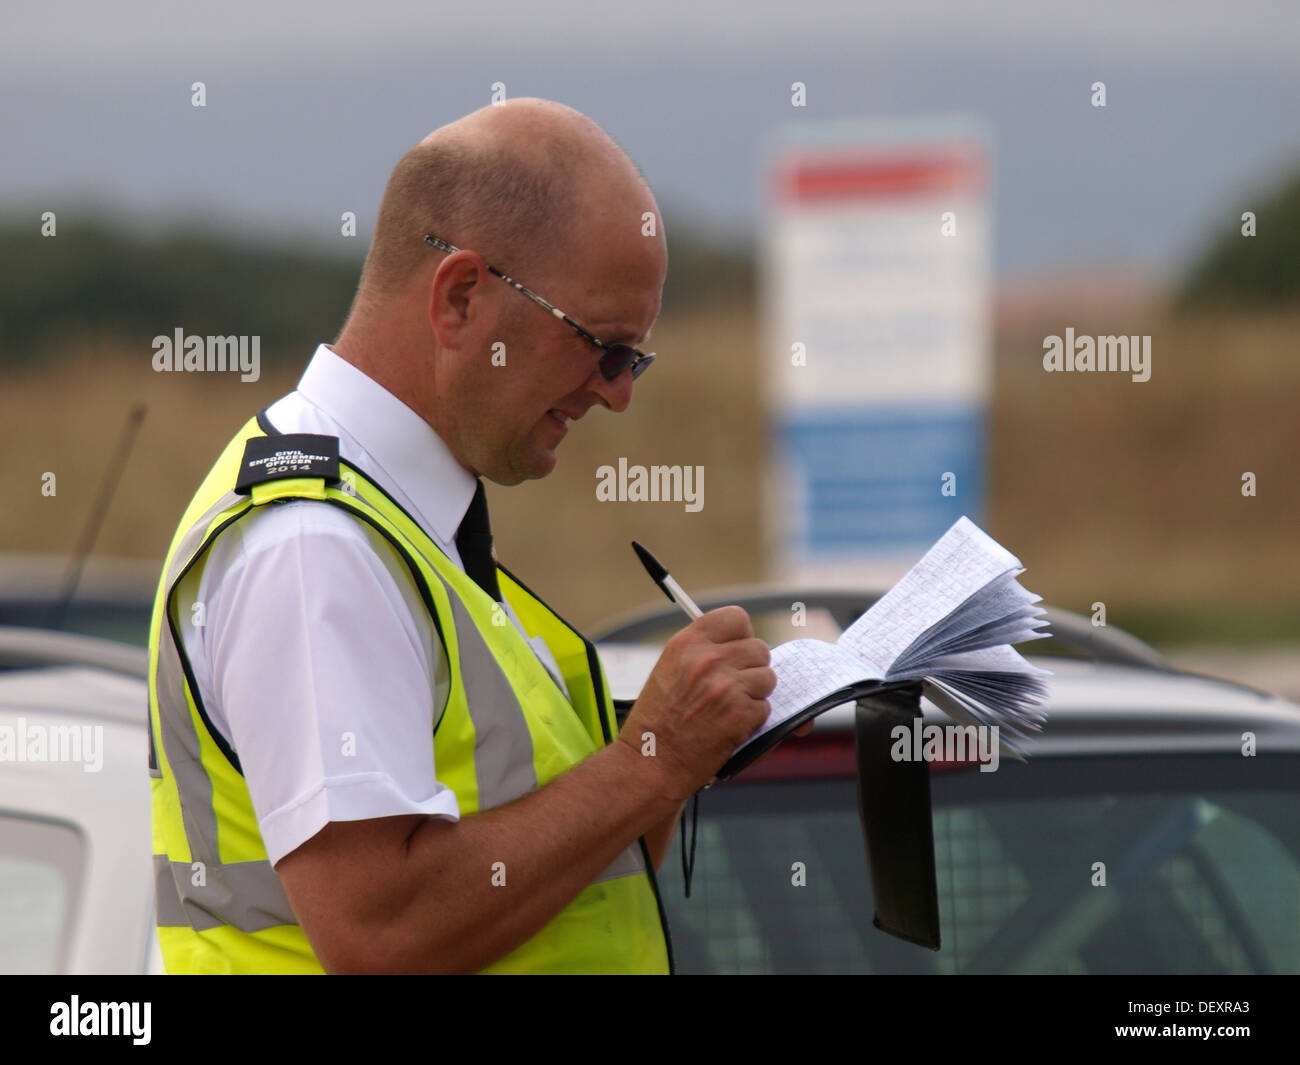 Civil Enforcement Office / Traffic warden writing in his notebook before giving a parking ticket, Exmouth, Devon, UK 2013 Stock Photo